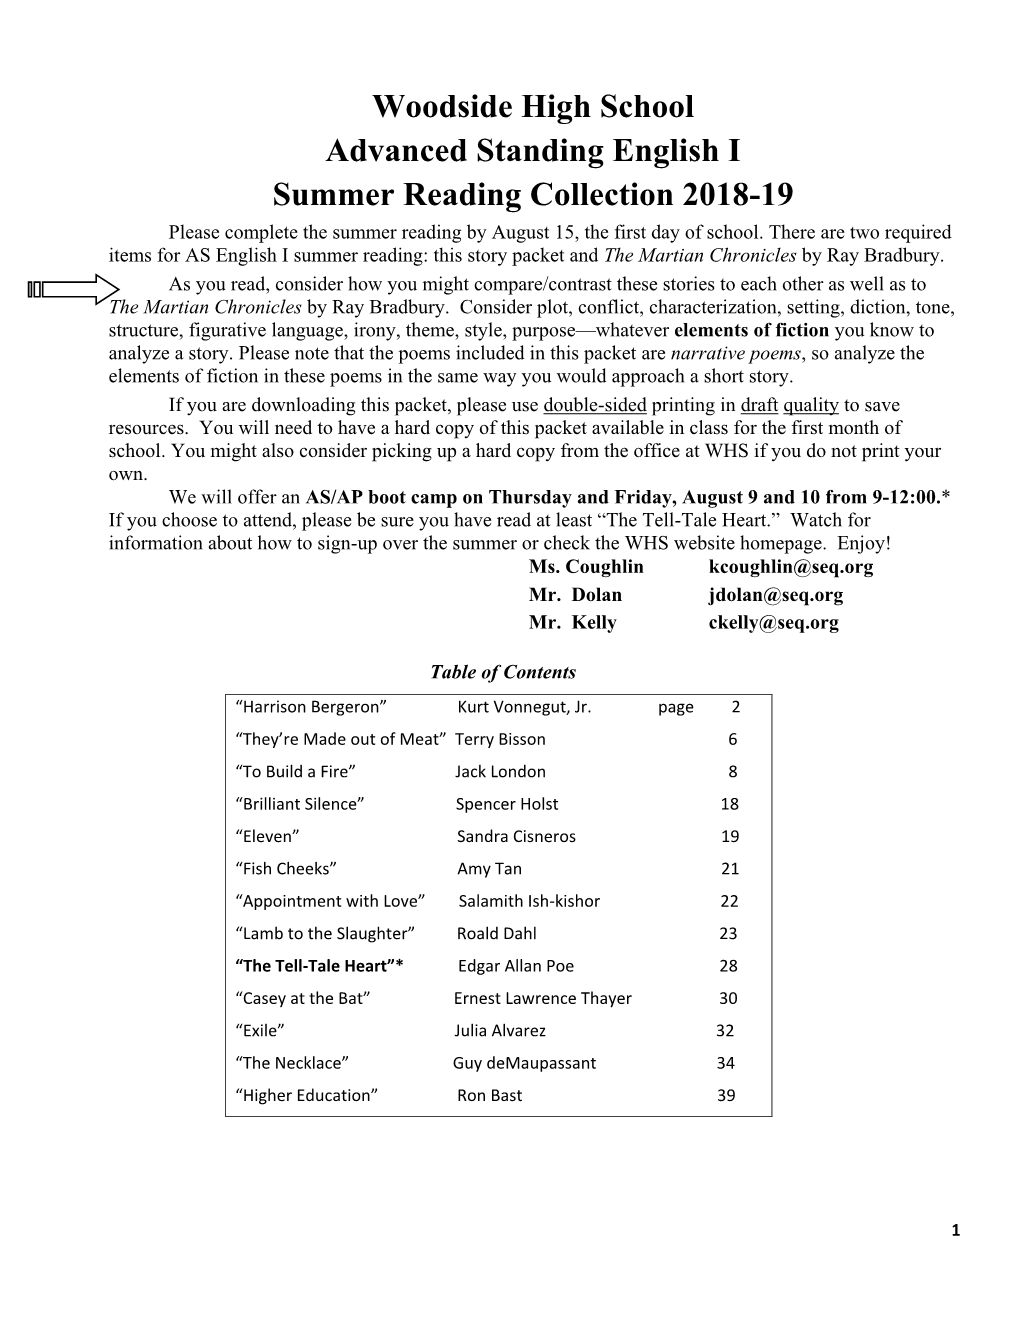 Woodside High School Advanced Standing English I Summer Reading Collection 2018-19 Please Complete the Summer Reading by August 15, the First Day of School